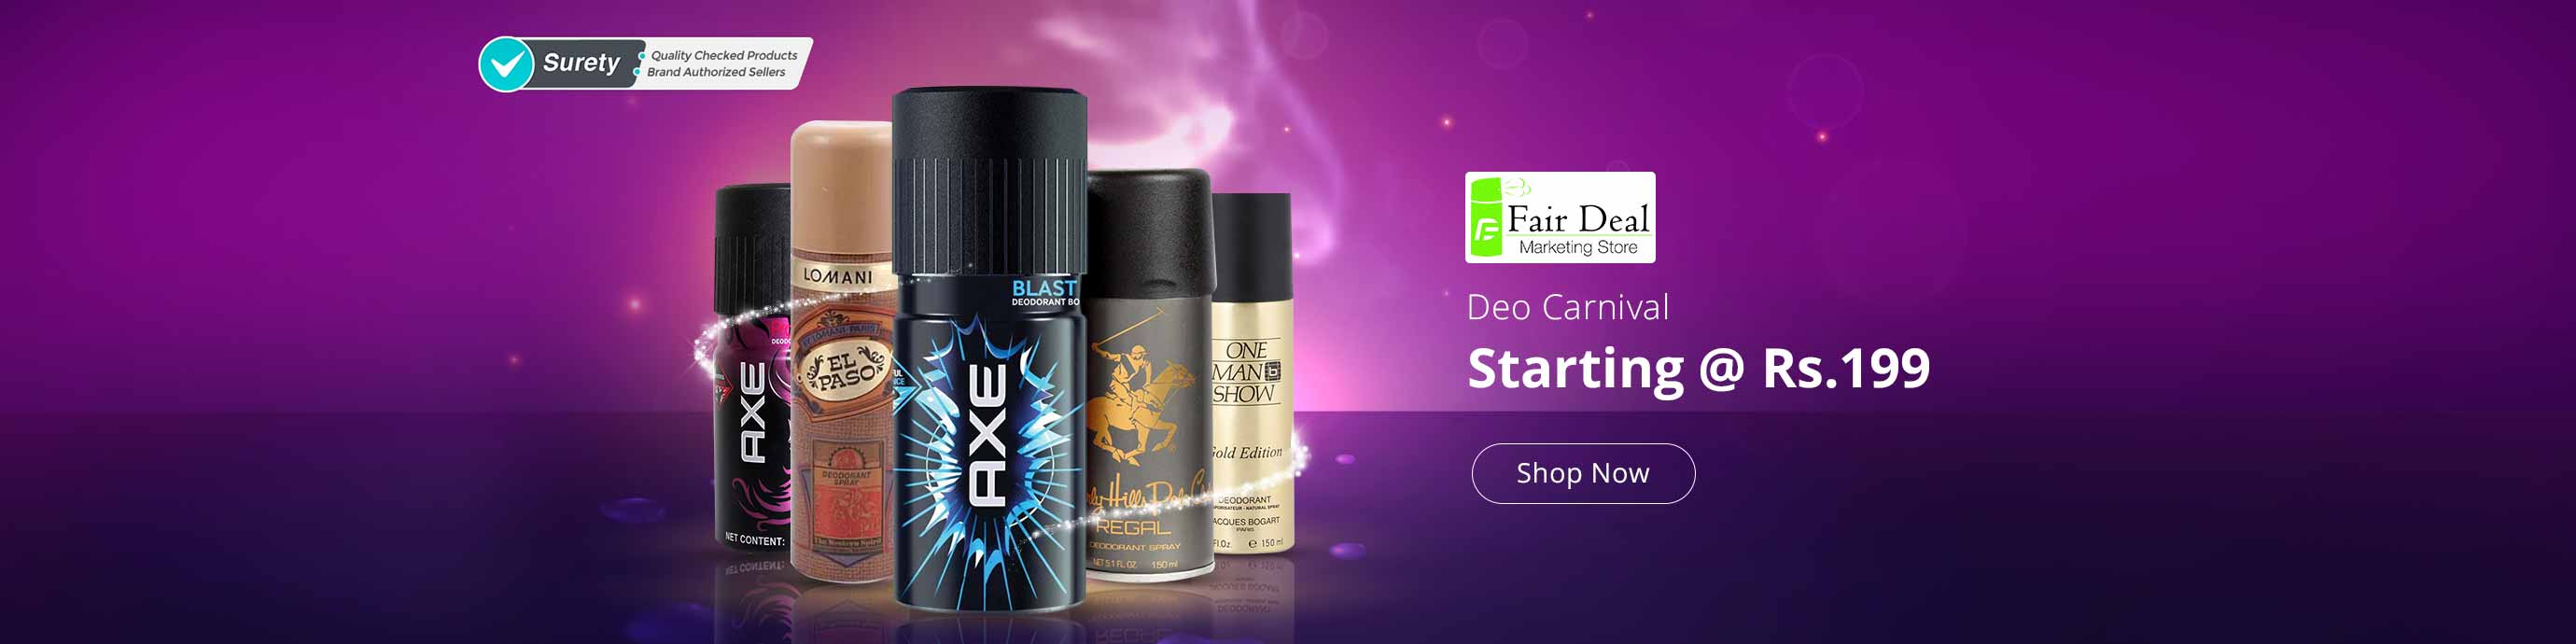 Shopclues - Deo Carnival Online Upto 70% Discount + 10% Cashback